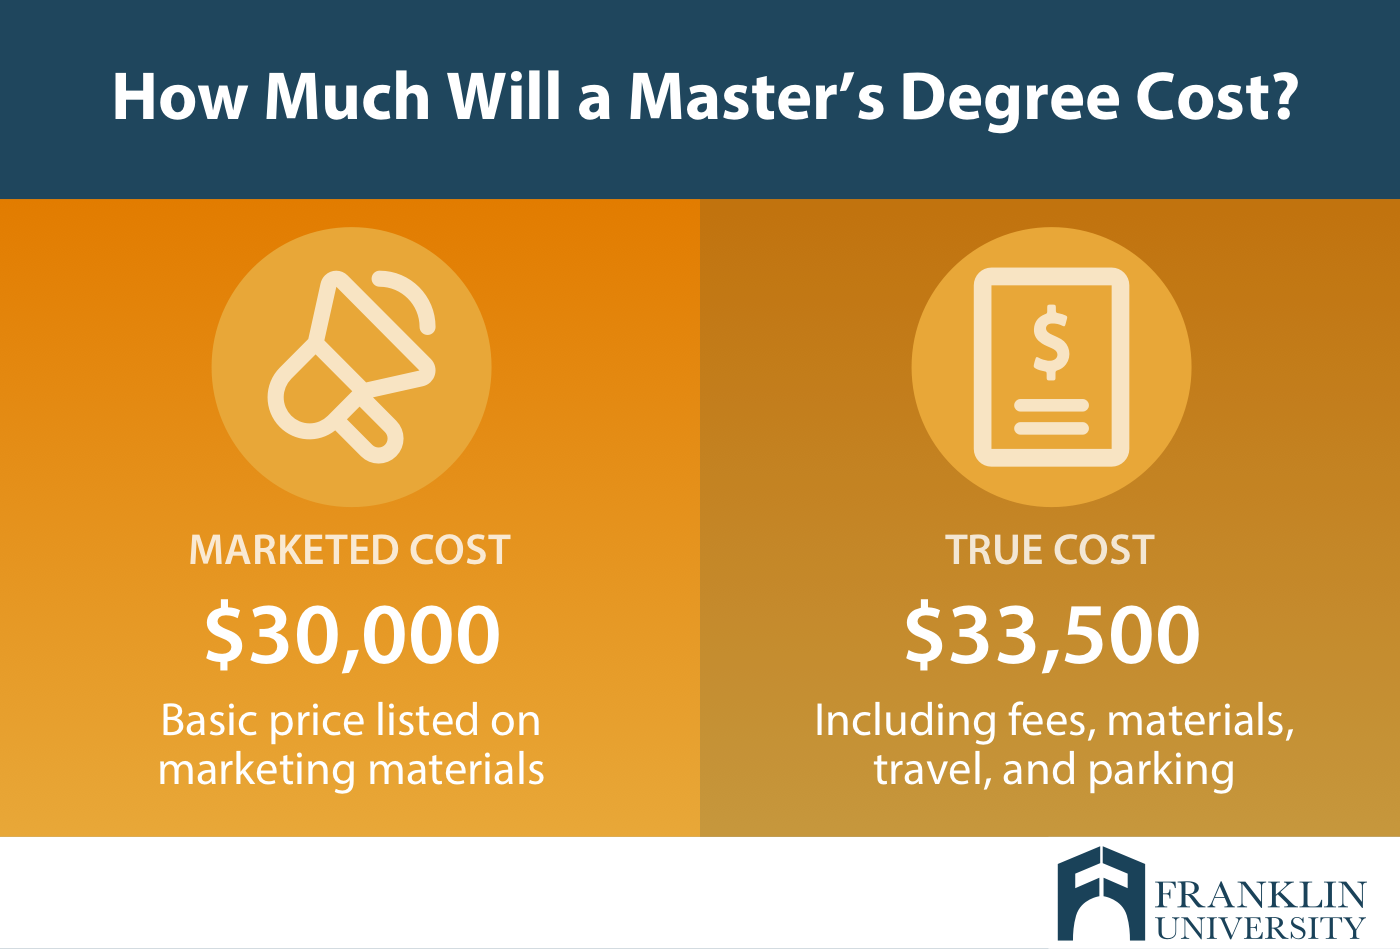 Now You Can Have The what ba degree means Of Your Dreams – Cheaper/Faster Than You Ever Imagined